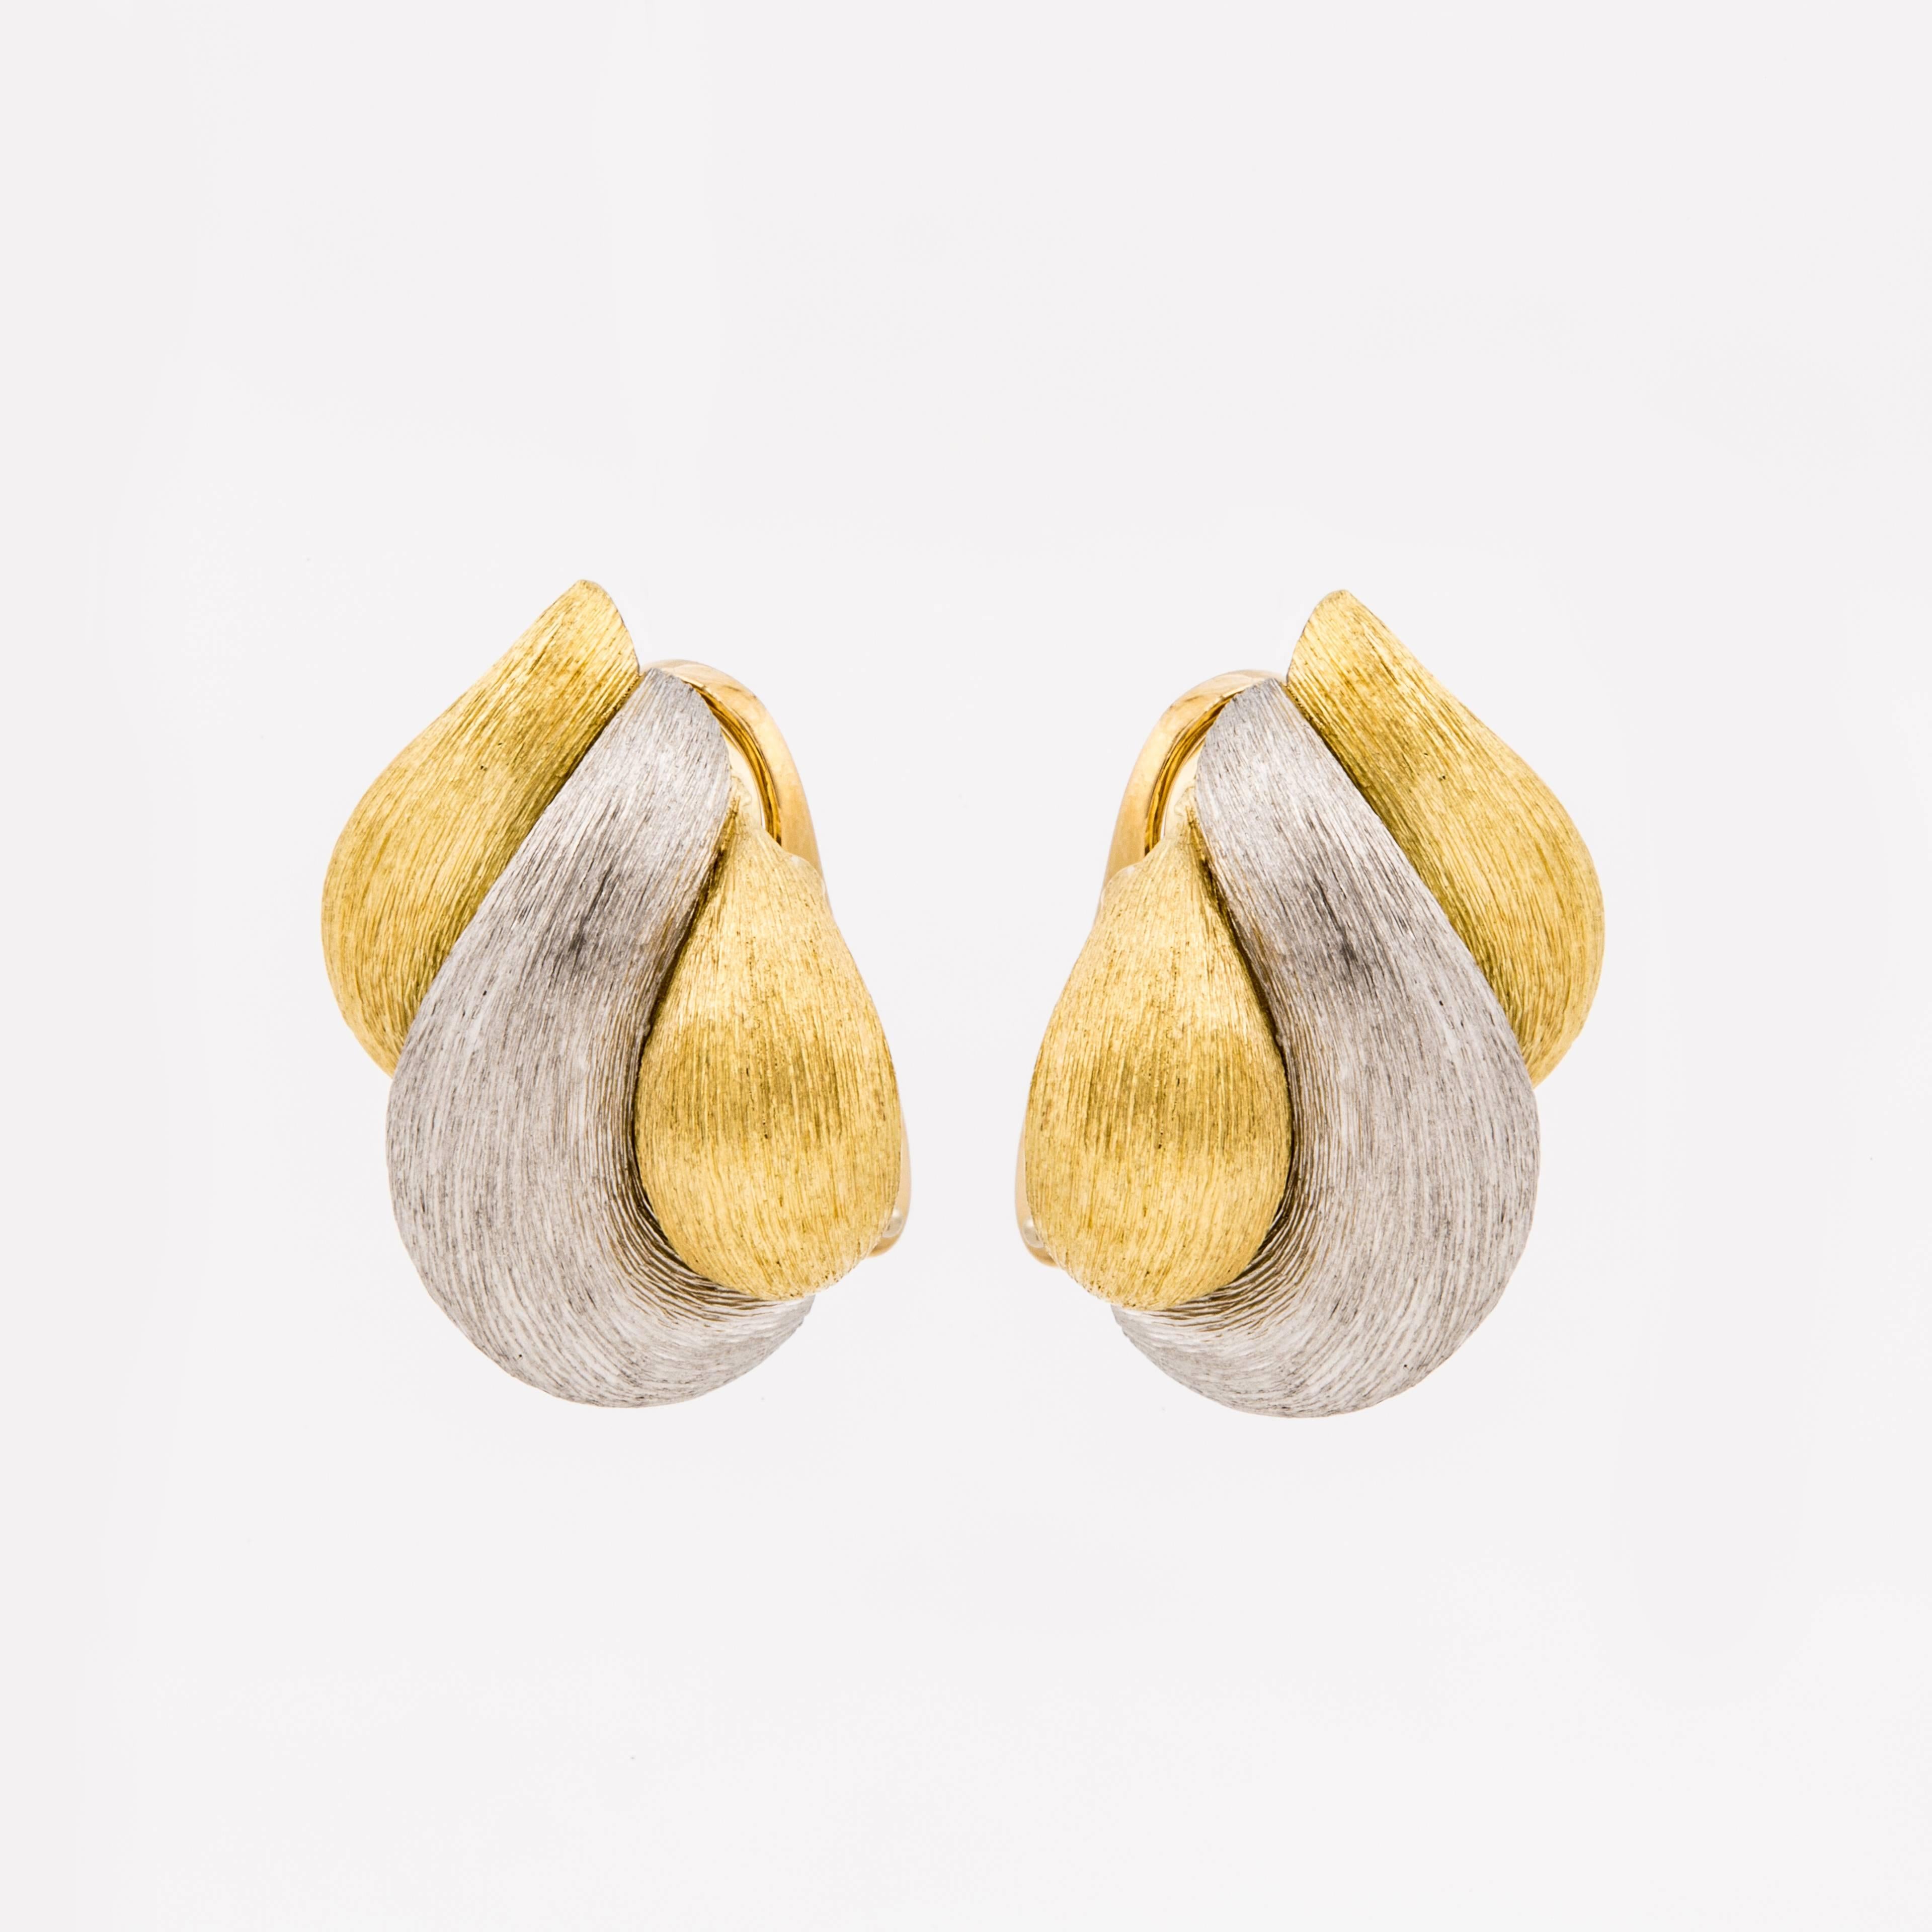 Henry Dunay 18K two tone Sabi finish earrings.  Marked on the back "750 HD A2996 5% Plat".  Graceful swirl design with clip backs.  Earrings measure 7/8" long and 3/4" wide.